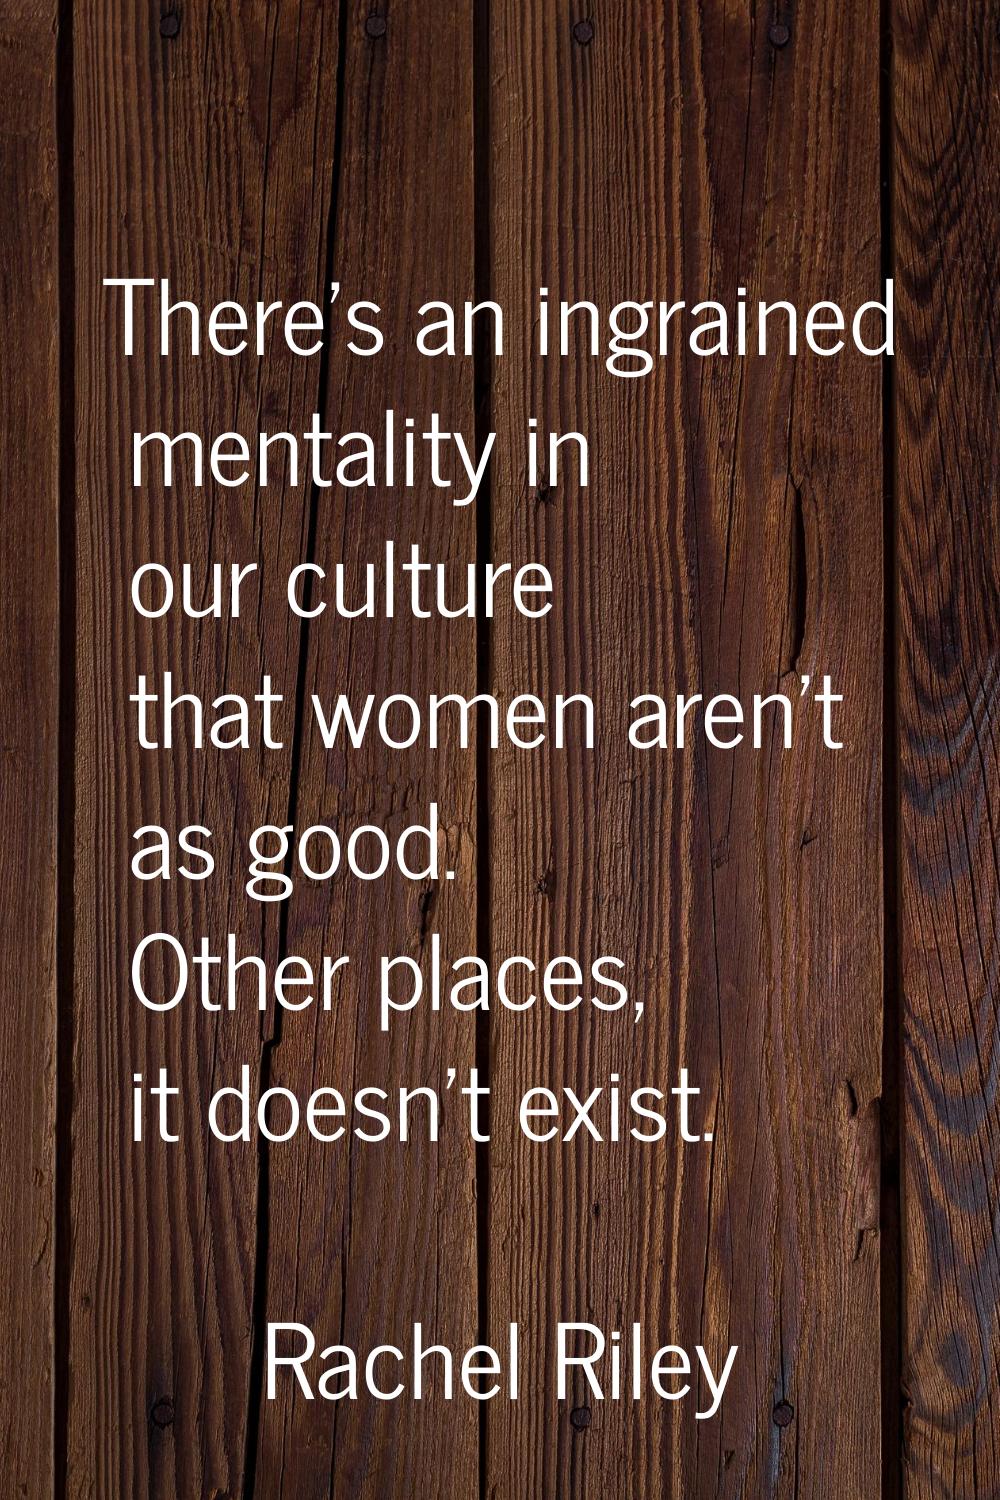 There's an ingrained mentality in our culture that women aren't as good. Other places, it doesn't e